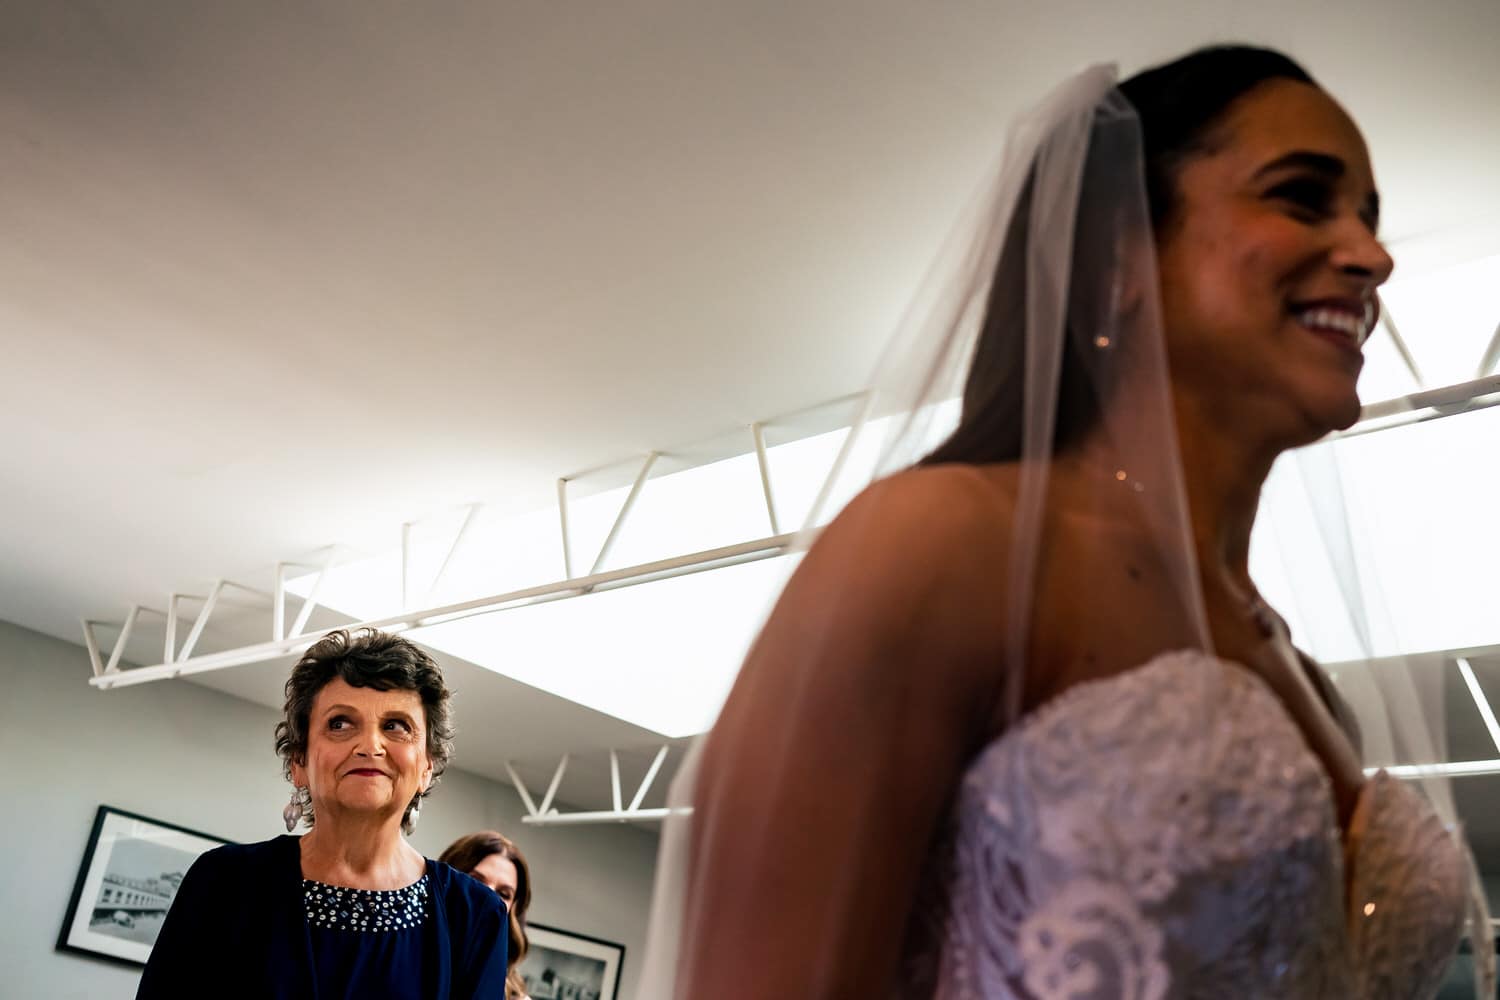 A candid picture of a bride looking at her reflection in the mirror at 28 Event Space on her summer wedding day. 